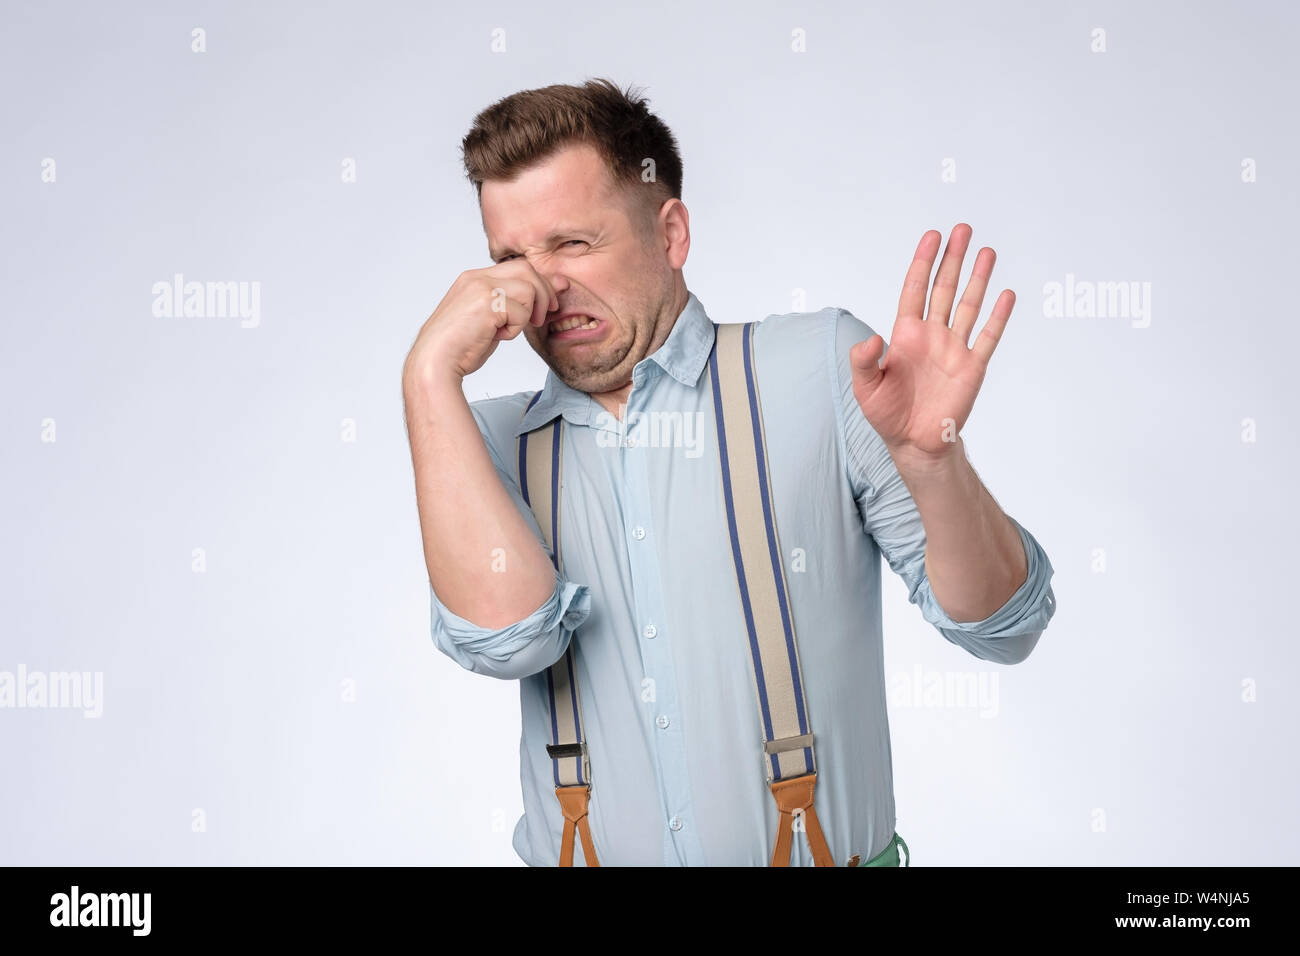 Displeased young man plugs nose as smells something stink and unpleasant. Stock Photo